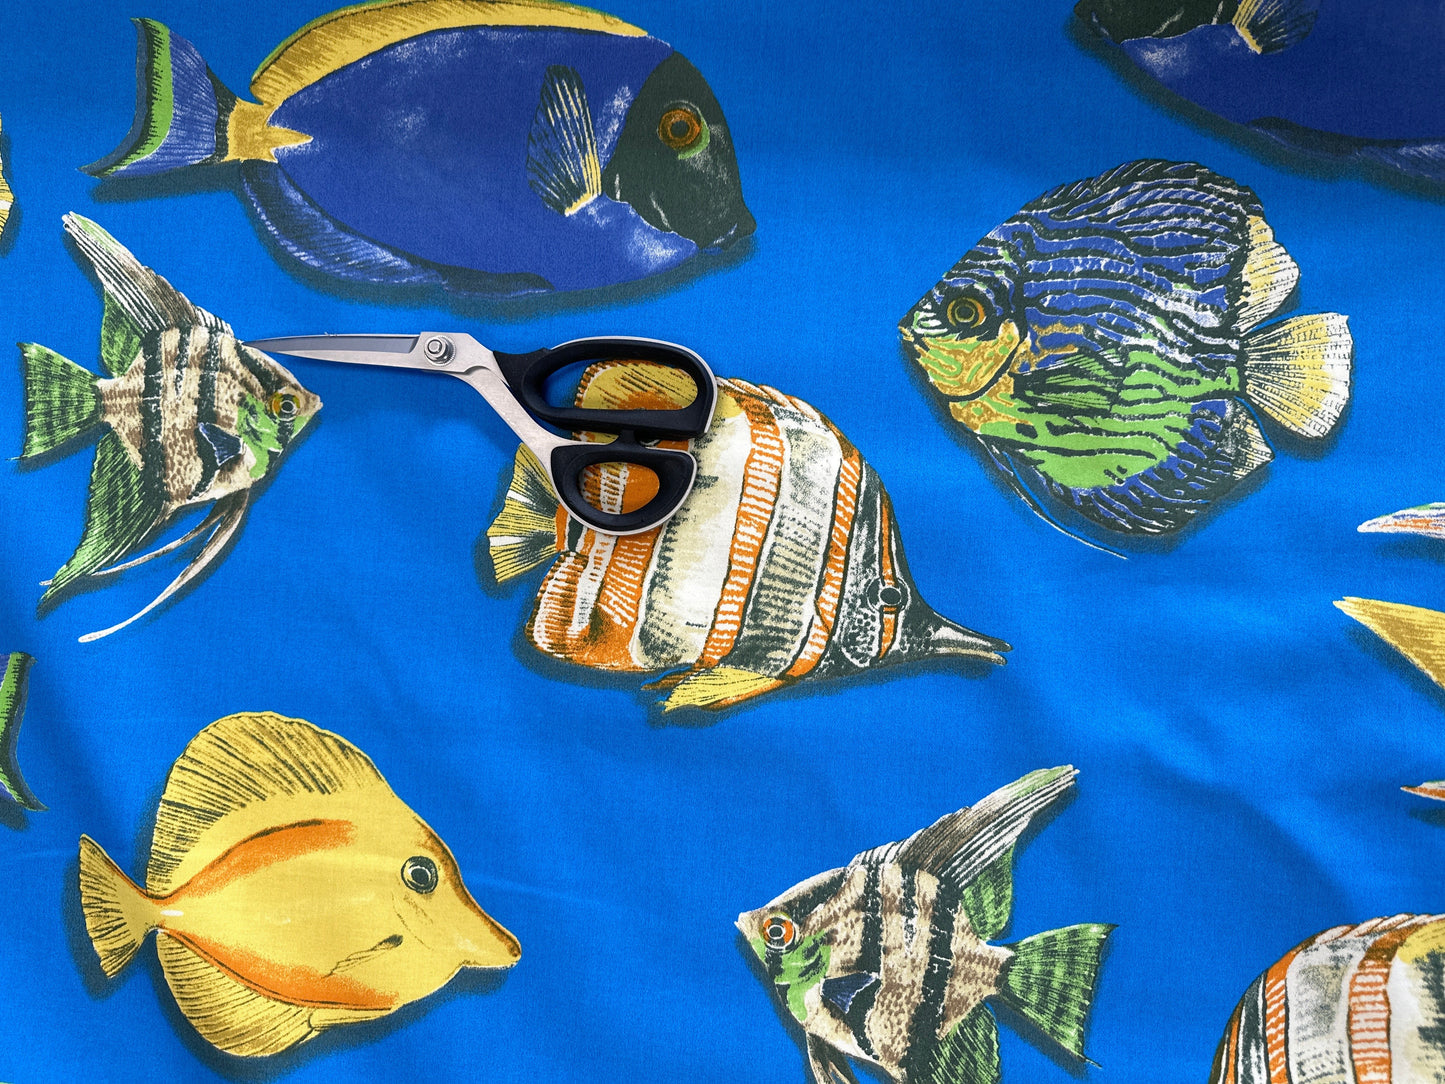 Tropical Fish on Blue Cotton Fabric